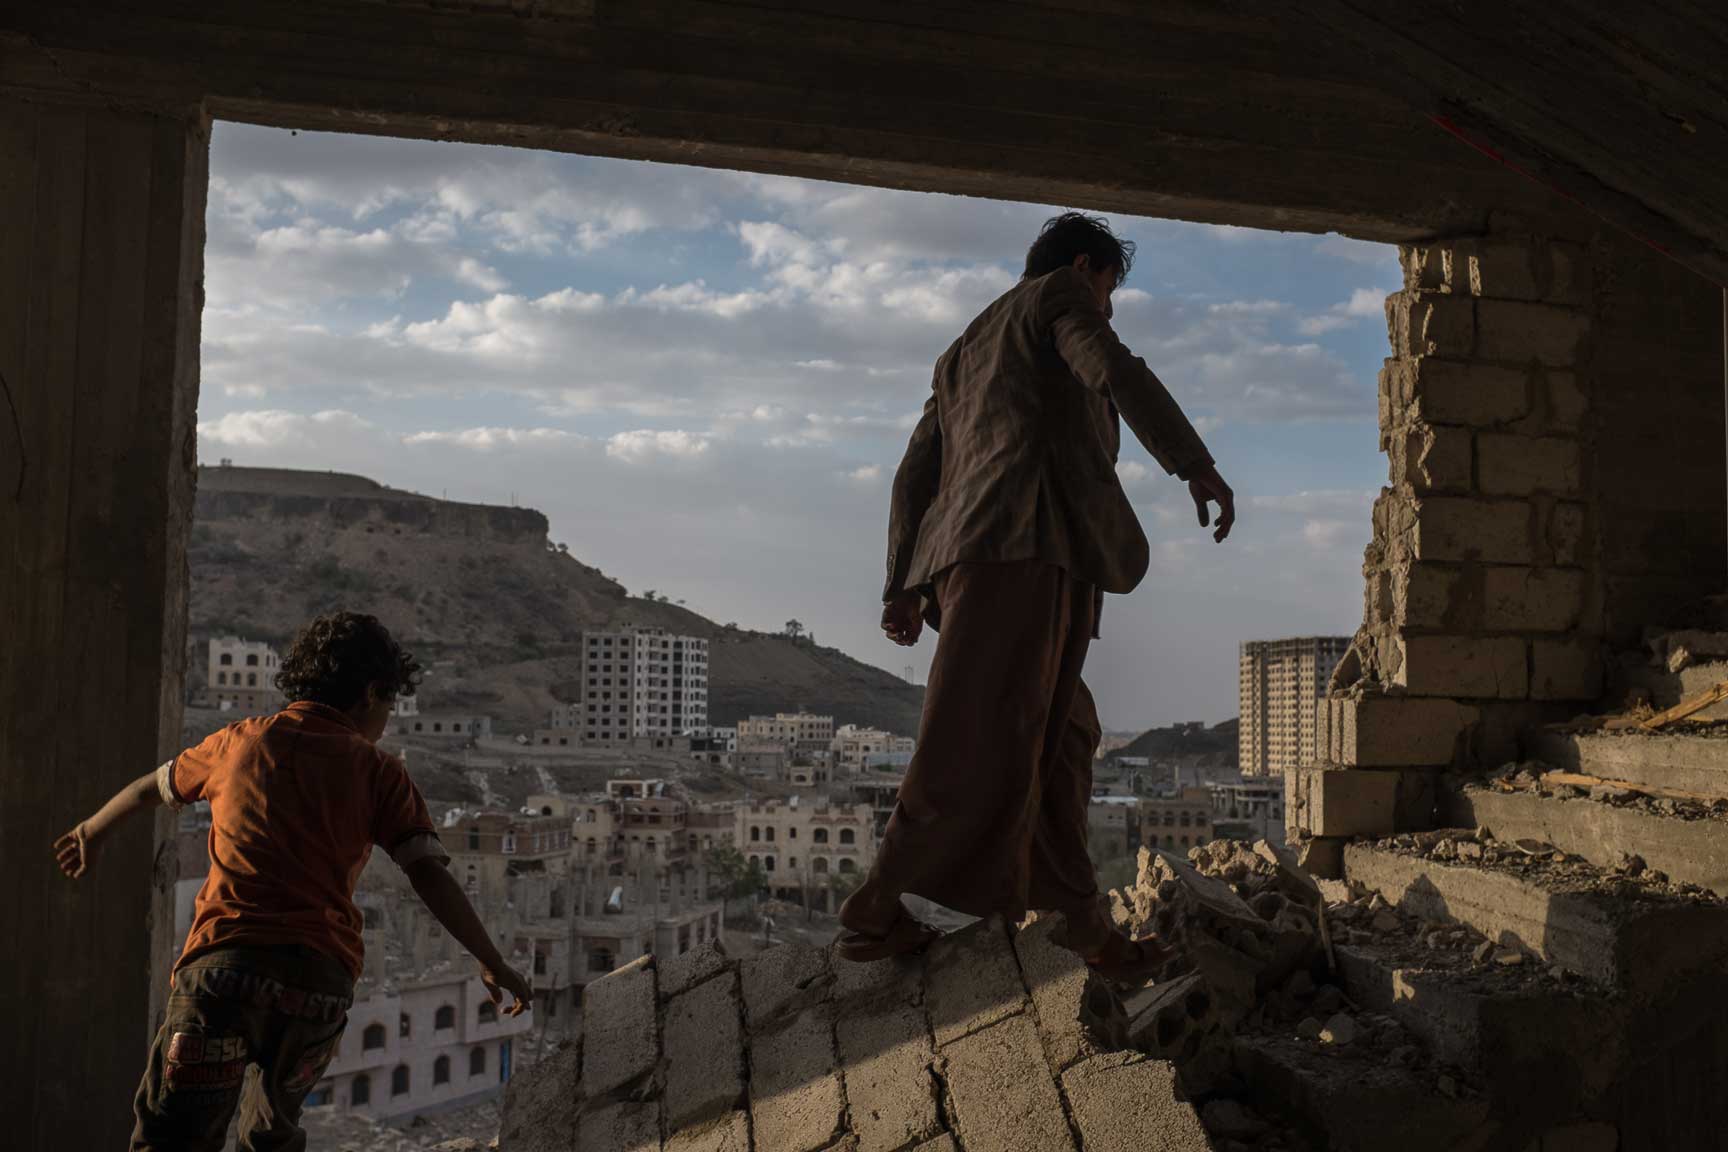 Yemeni brothers climb the remains of an apartment building in Faj Attan, a district in Yemen heavily targeted by airstrike, Monday Auugst 17, 2015 in Sana'a, Yemen.